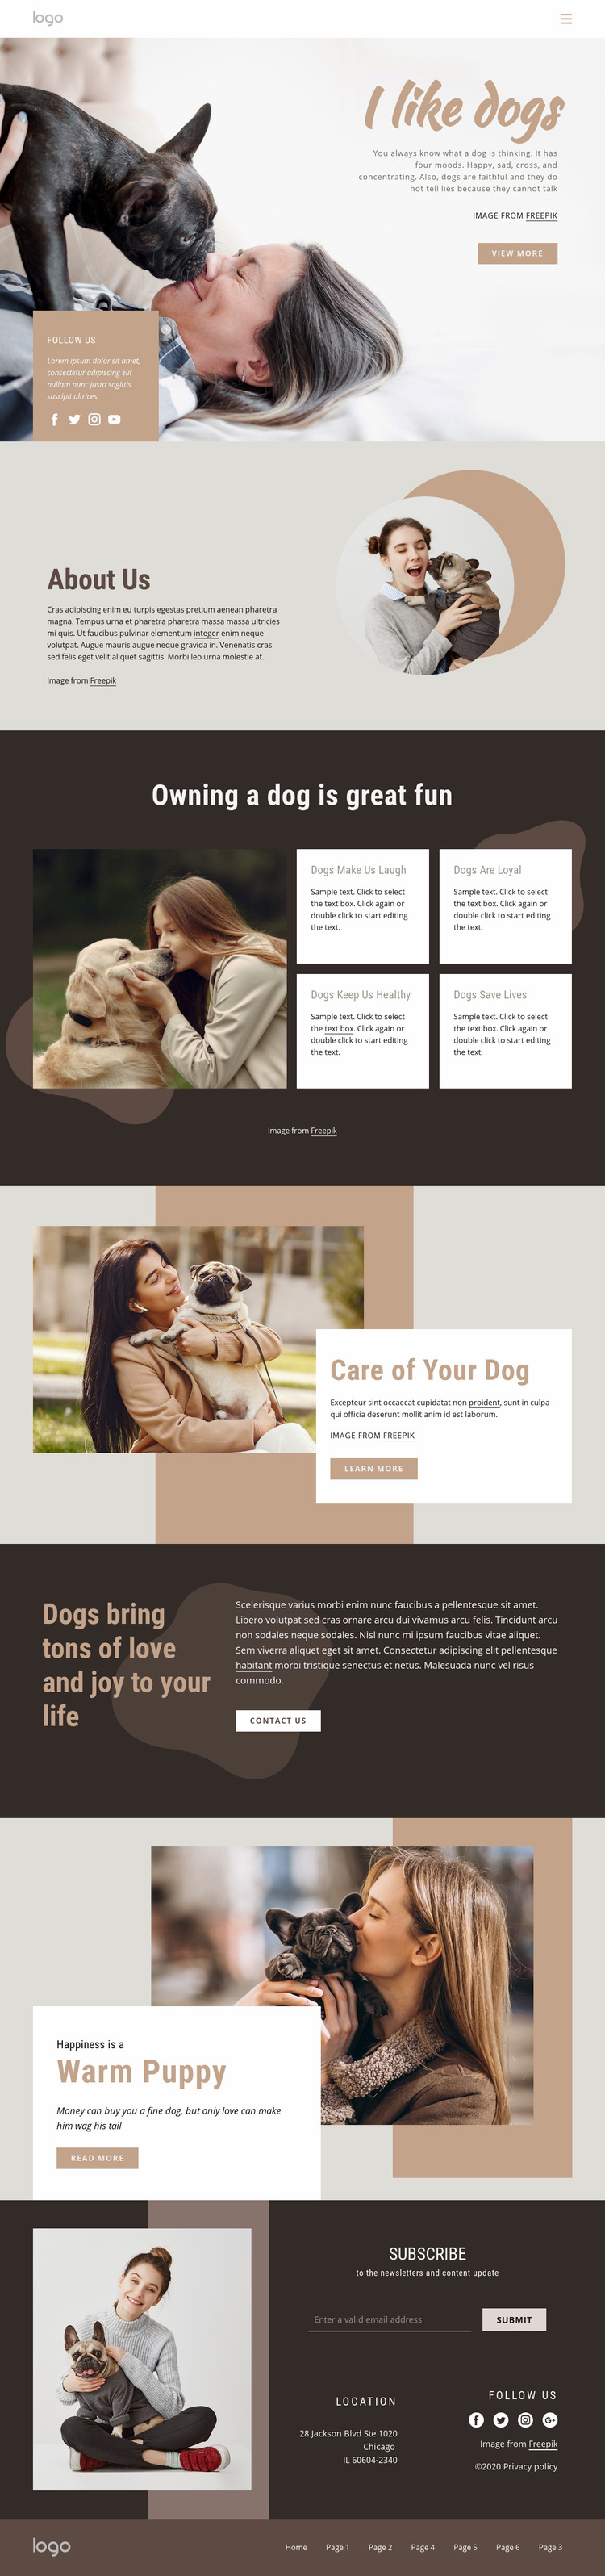 All about dogs Web Page Design